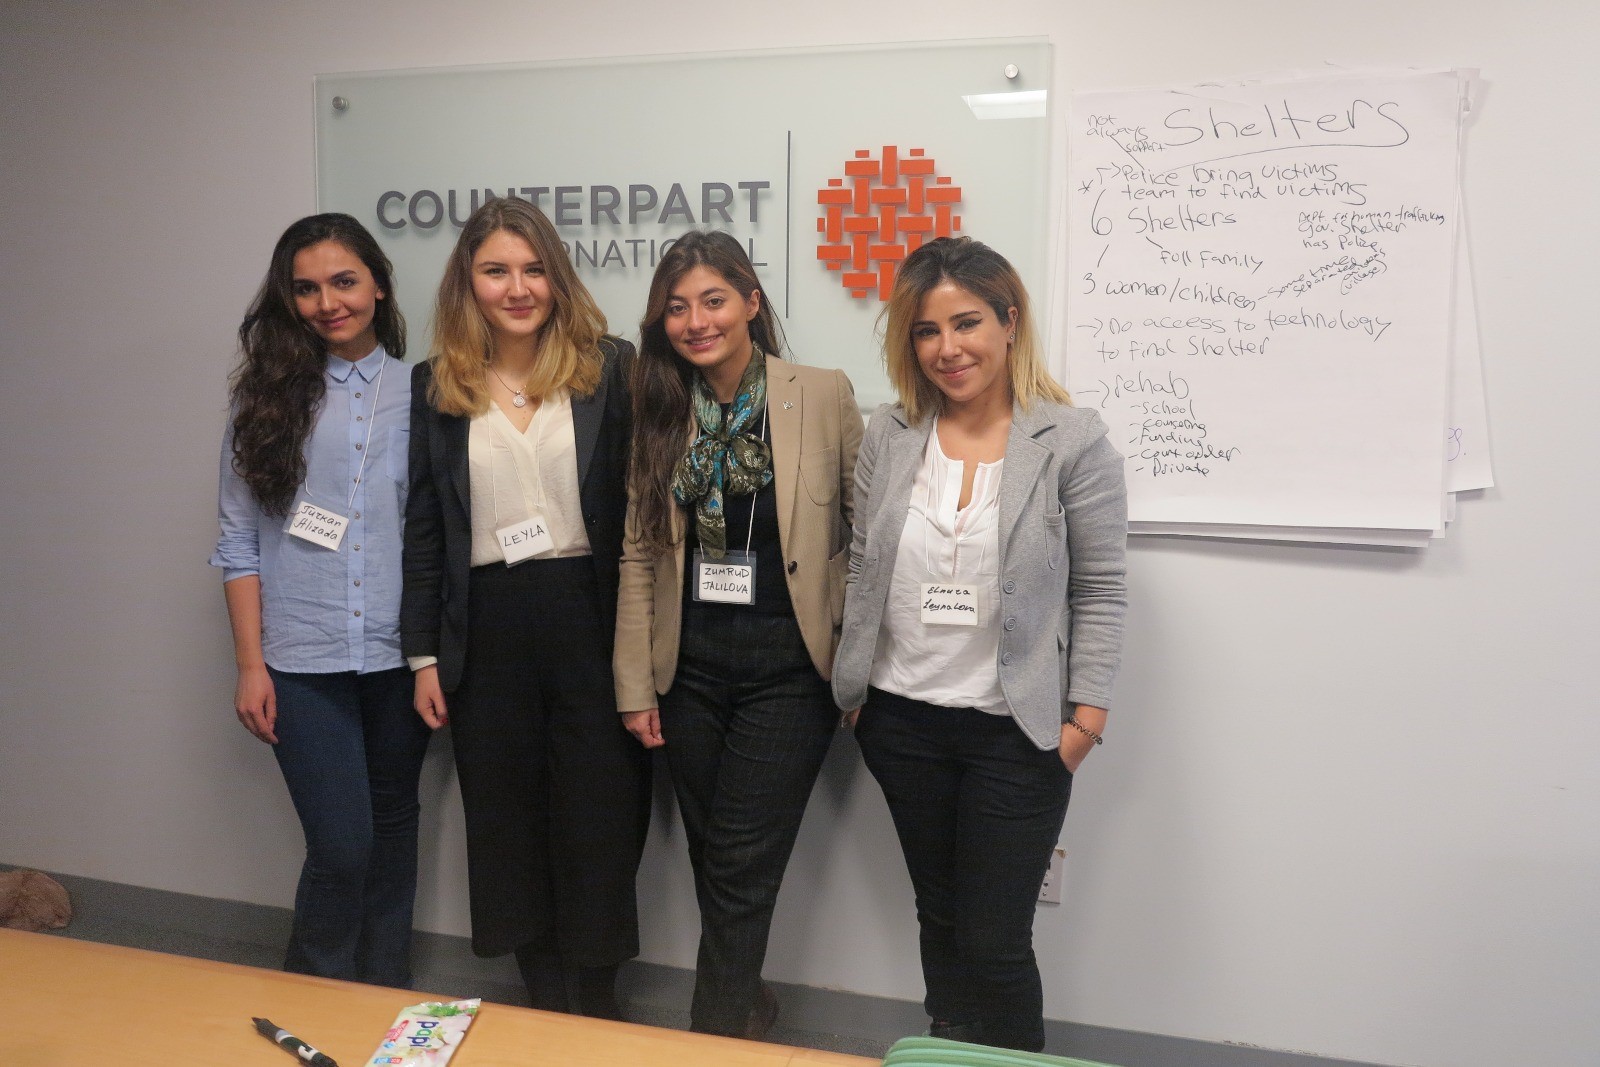 The Study Tour began at Counterpart International headquarters where they women met with our gender expert, Maria Witz (not pictured)